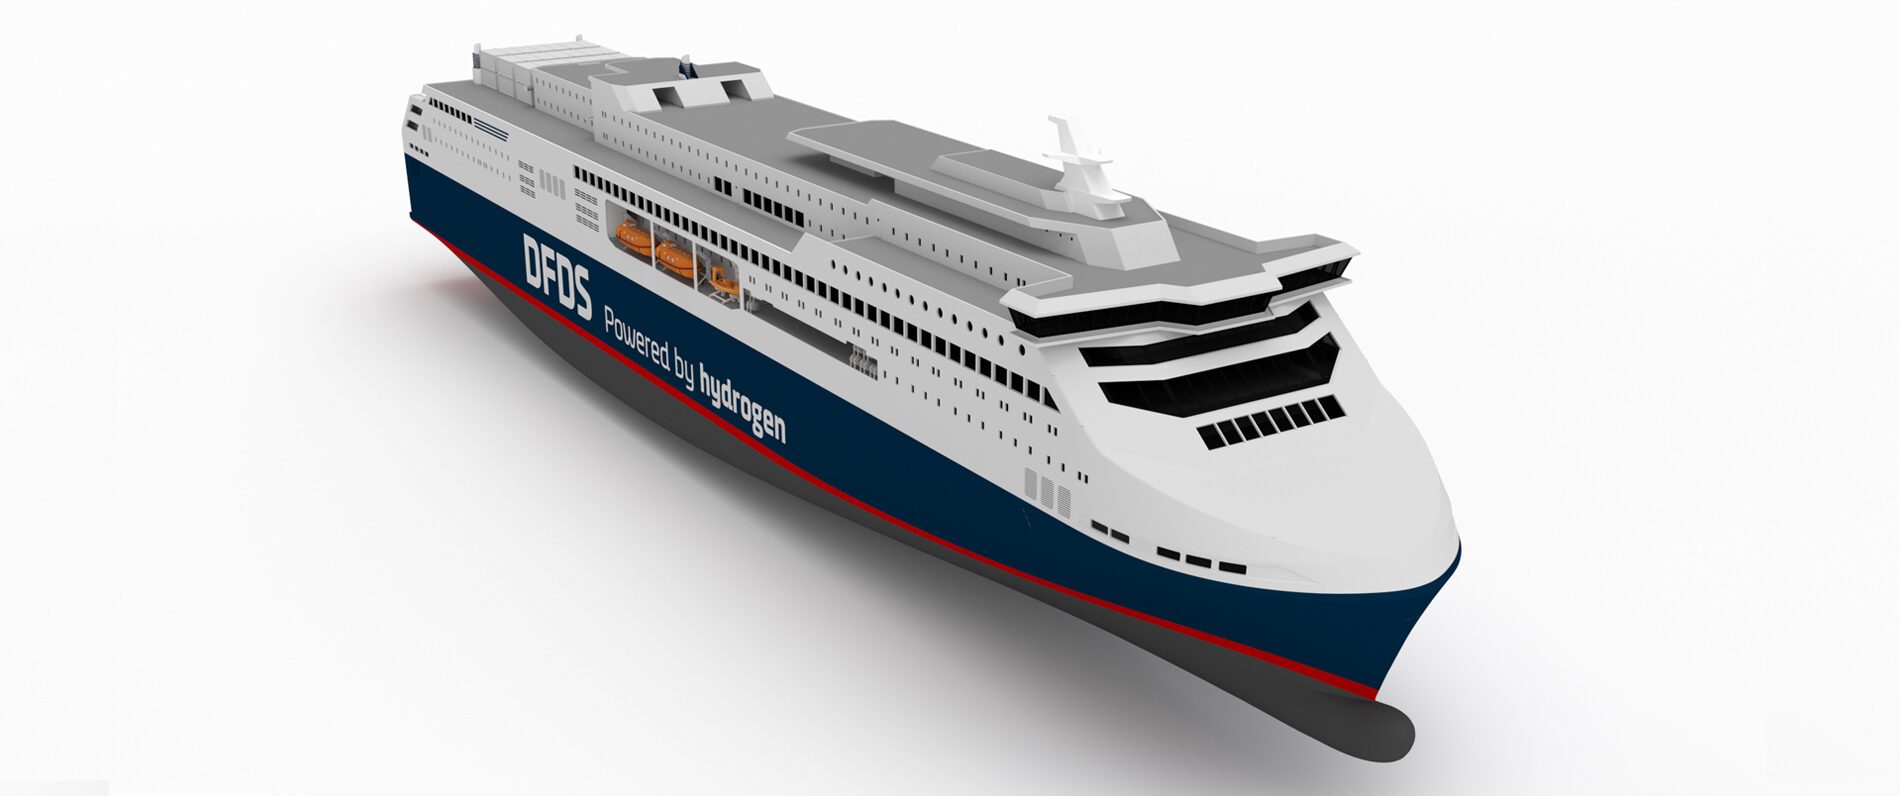 DFDS Planning Hydrogen-Powered Ferry